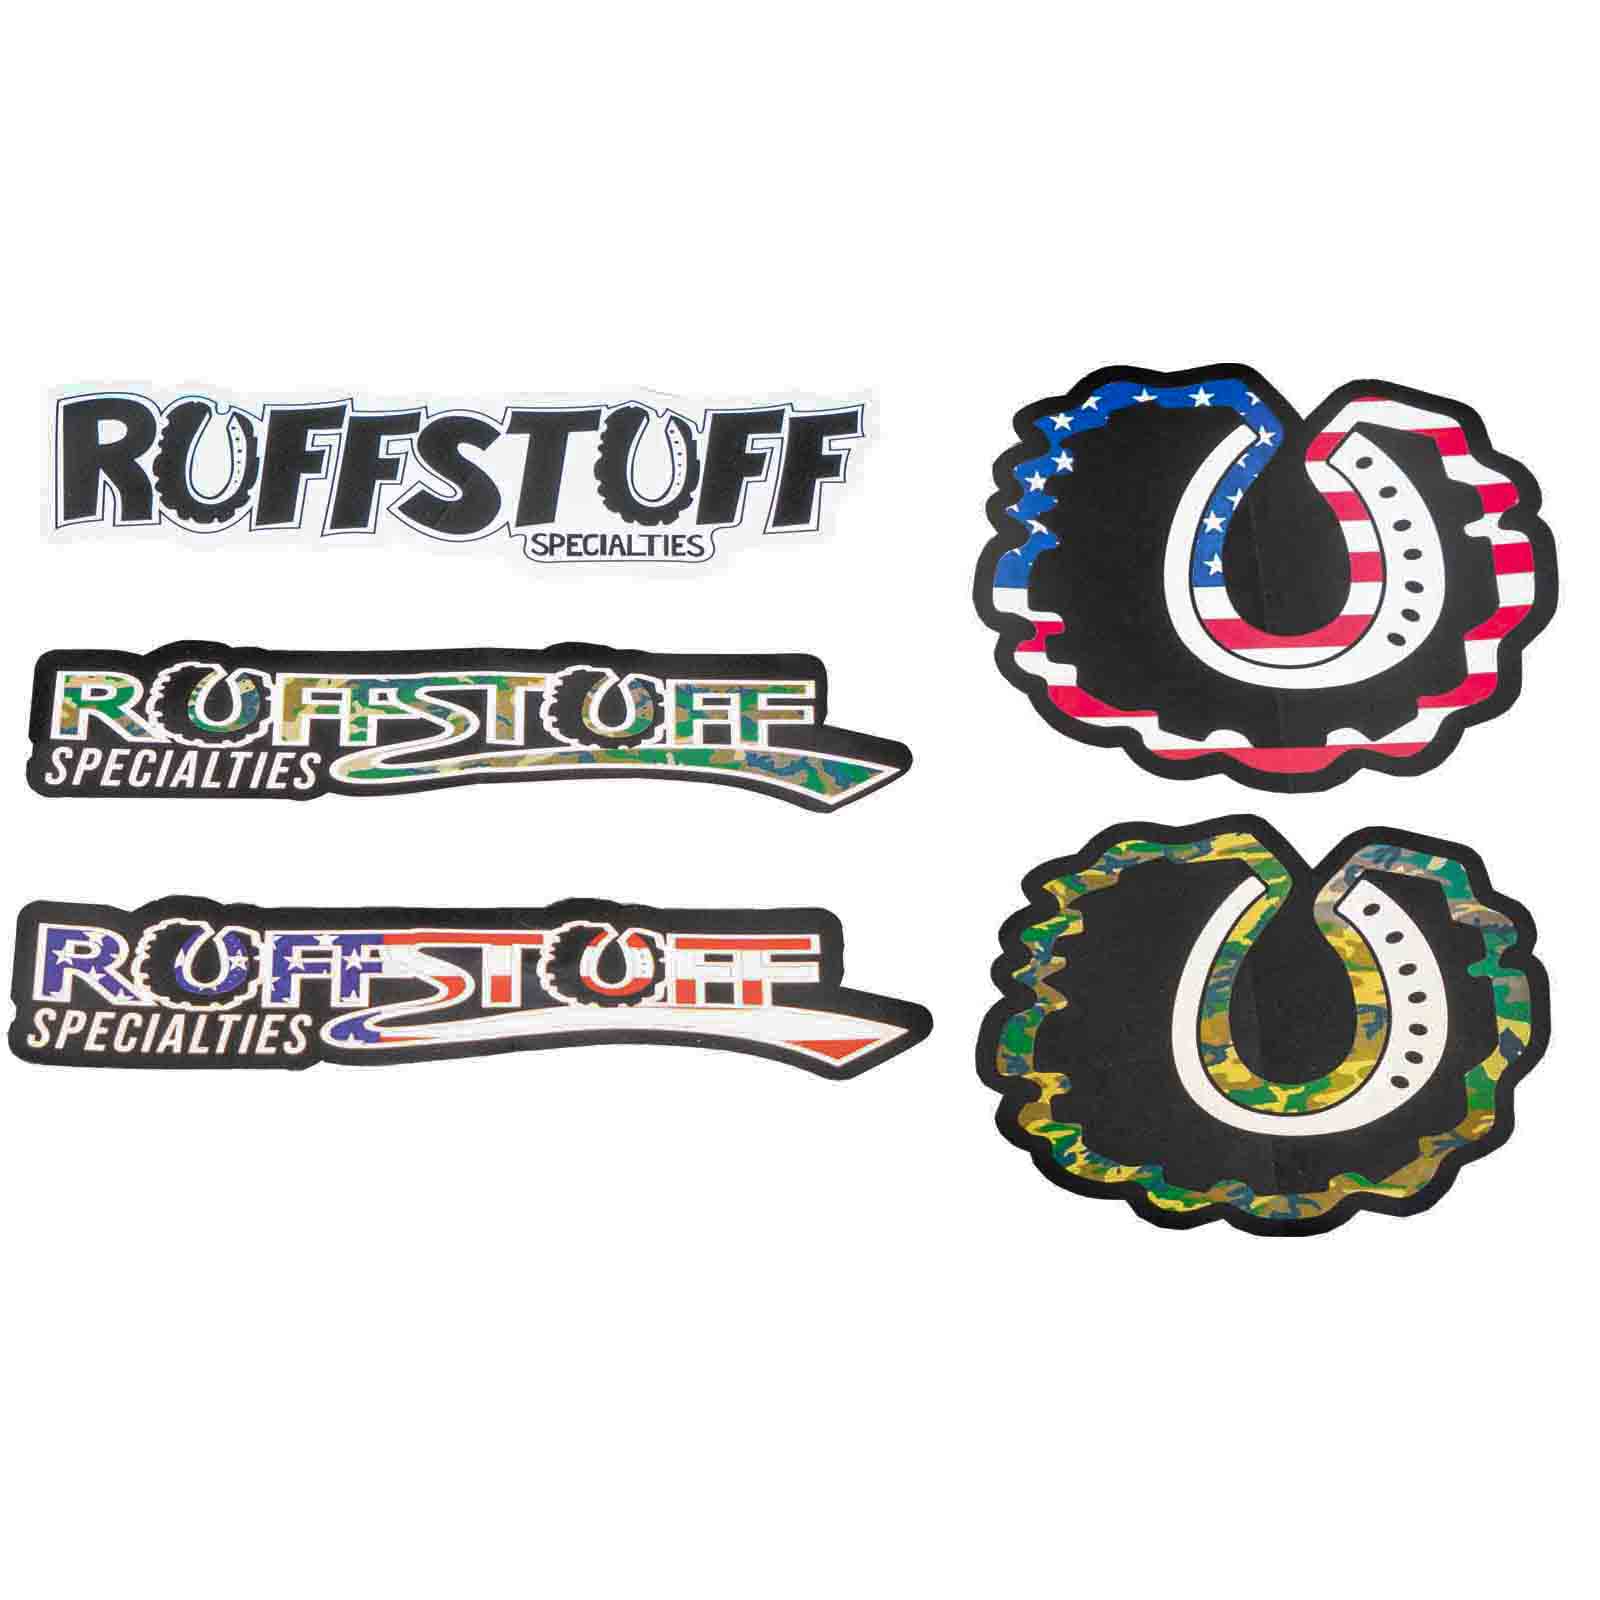 FULL STICKERS PACK [NEW]